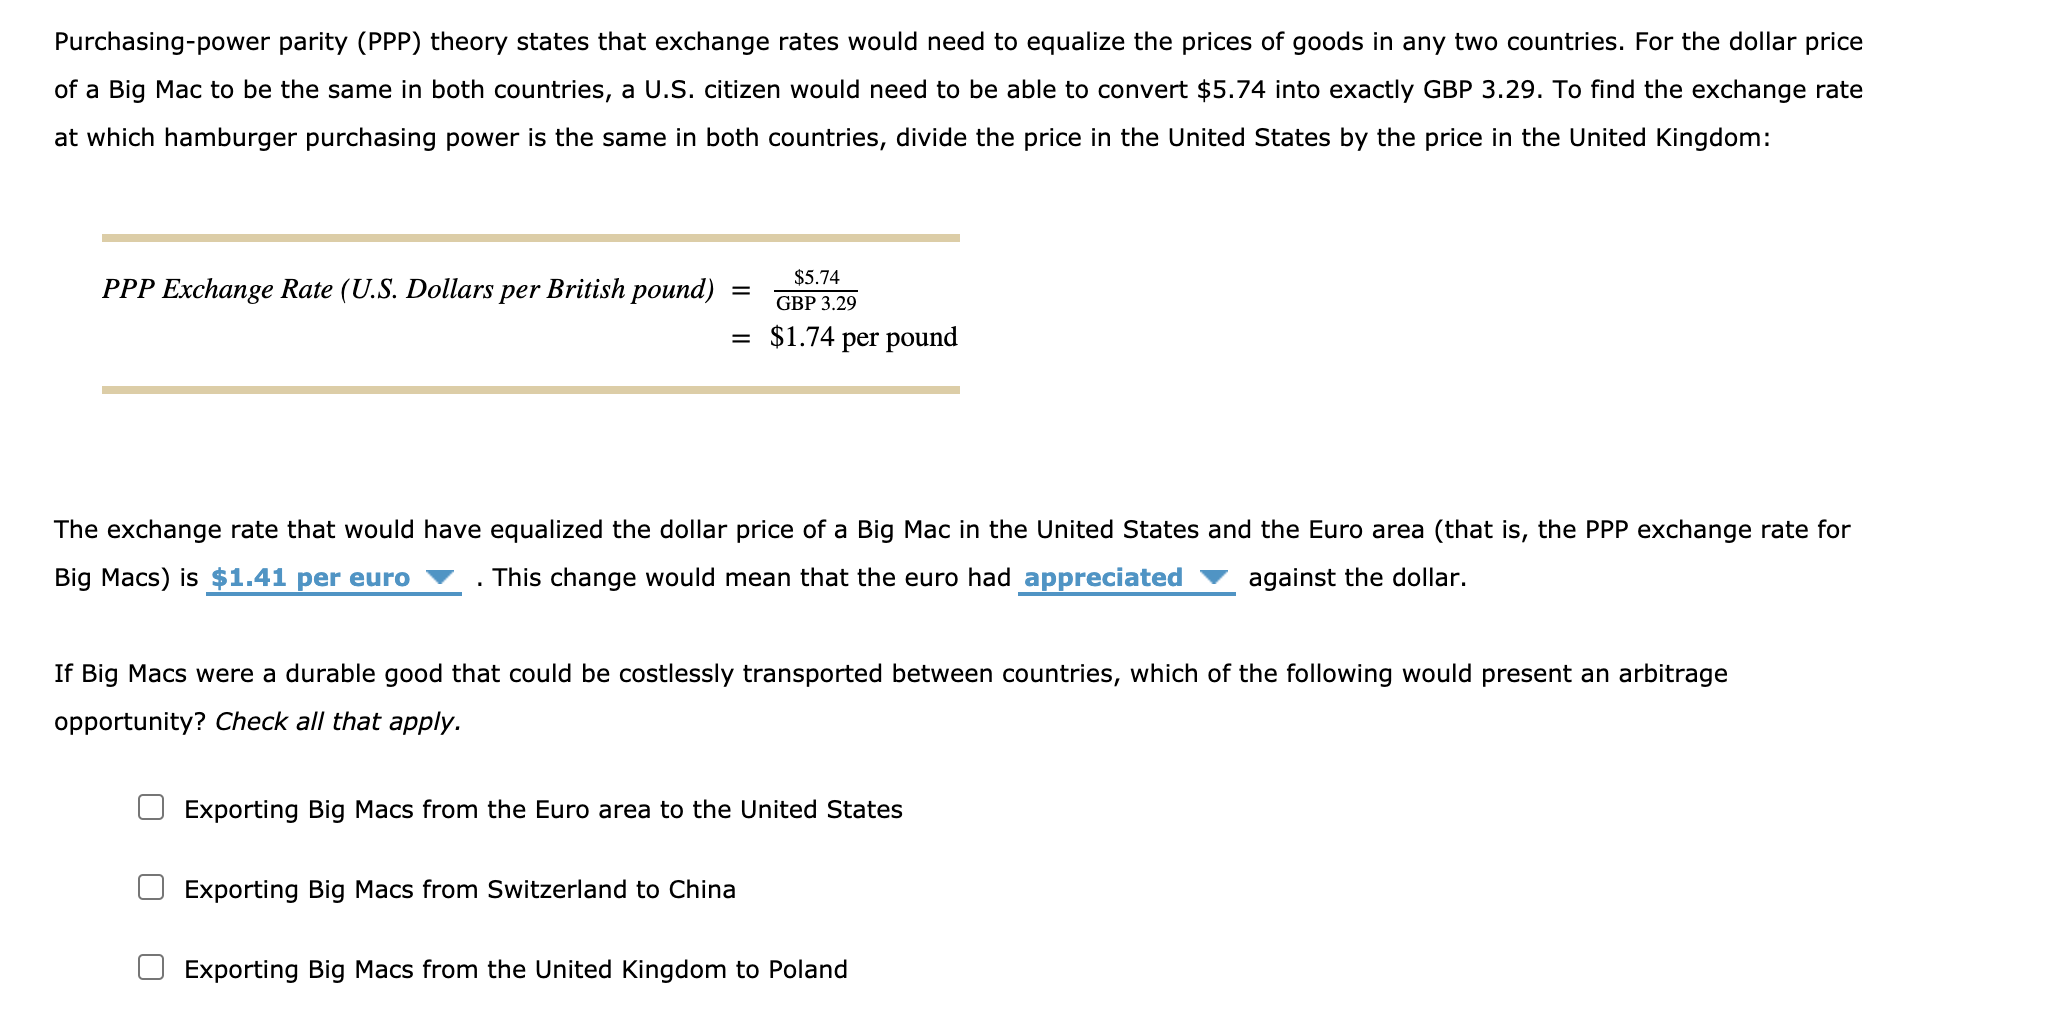 If Big Macs were a durable good that could be costlessly transported between countries, which of the following would present an arbitrage
opportunity? Check all that apply.
Exporting Big Macs from the Euro area to the United States
Exporting Big Macs from Switzerland to China
Exporting Big Macs from the United Kingdom to Poland
